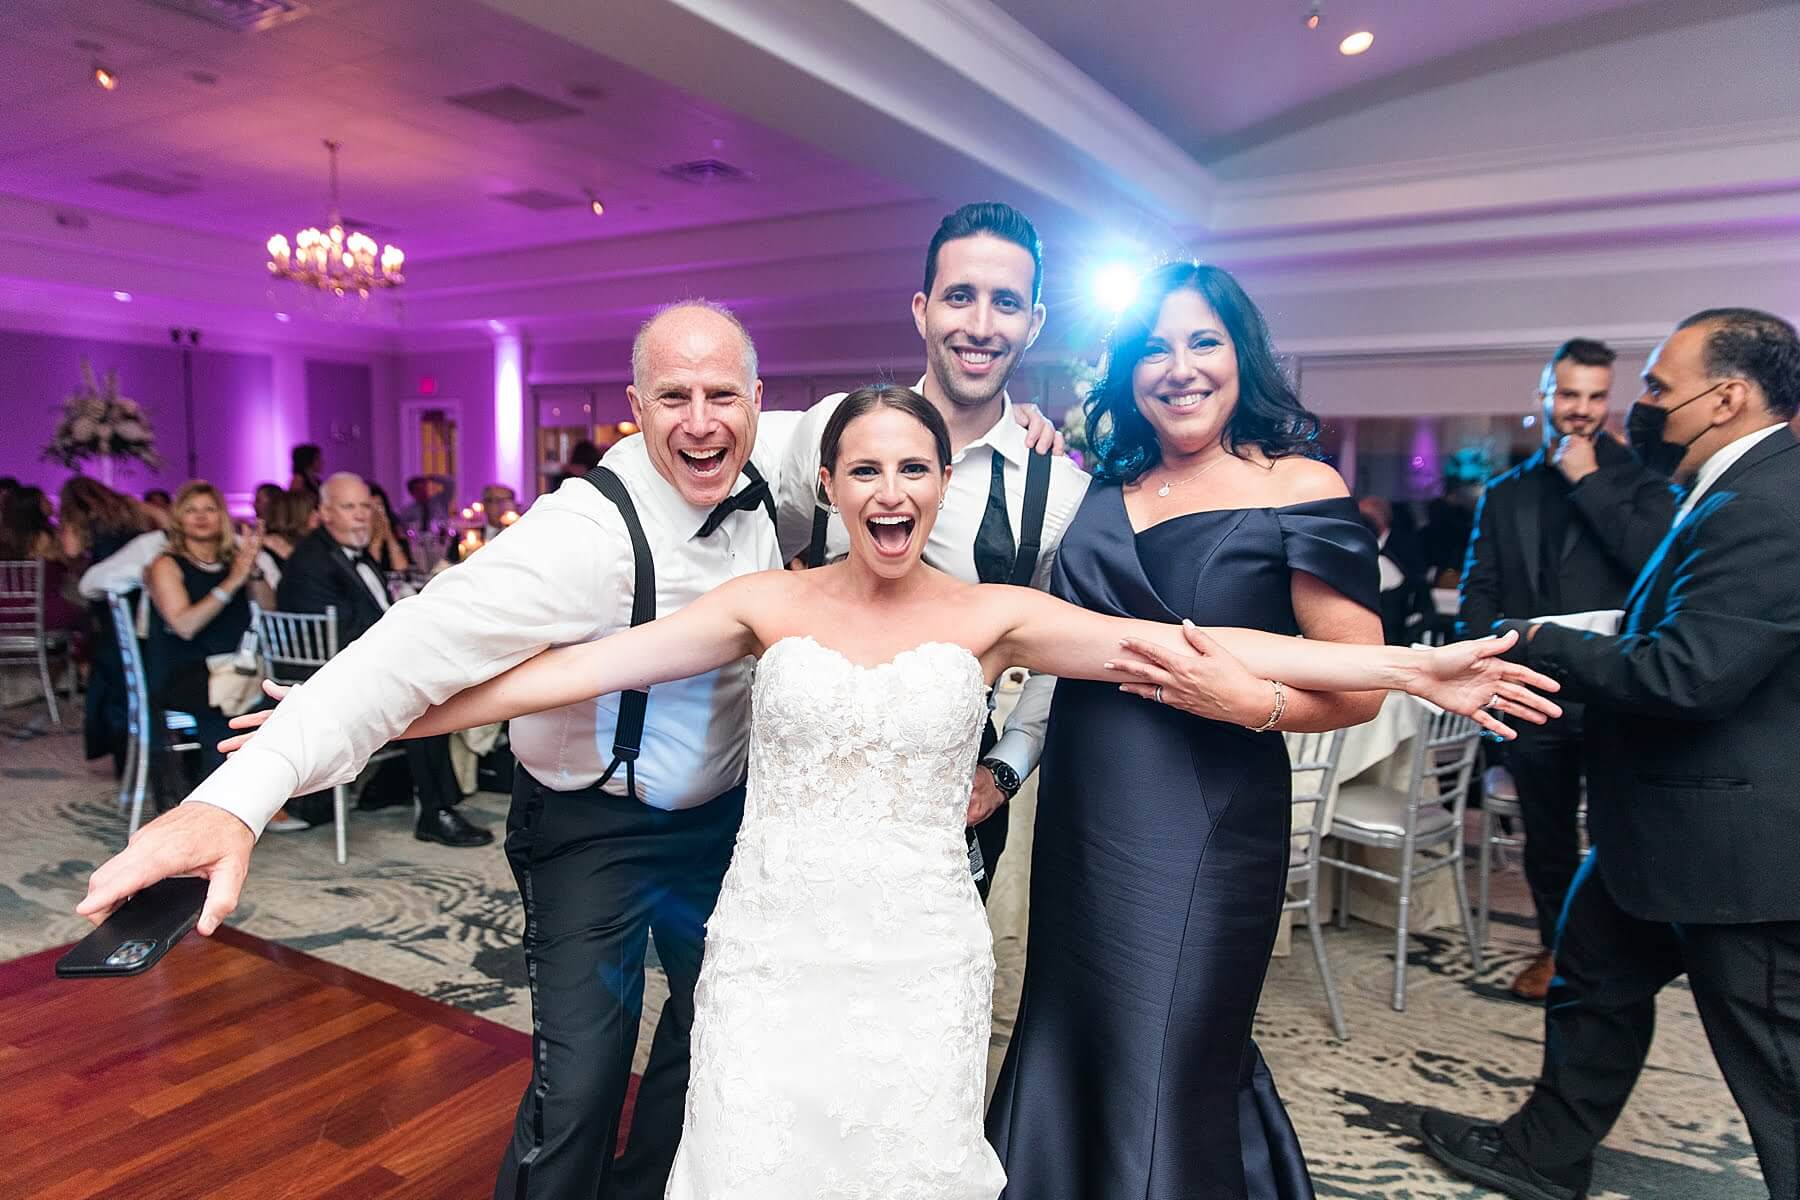 A group of people posing for a photo at a new jersey wedding reception.